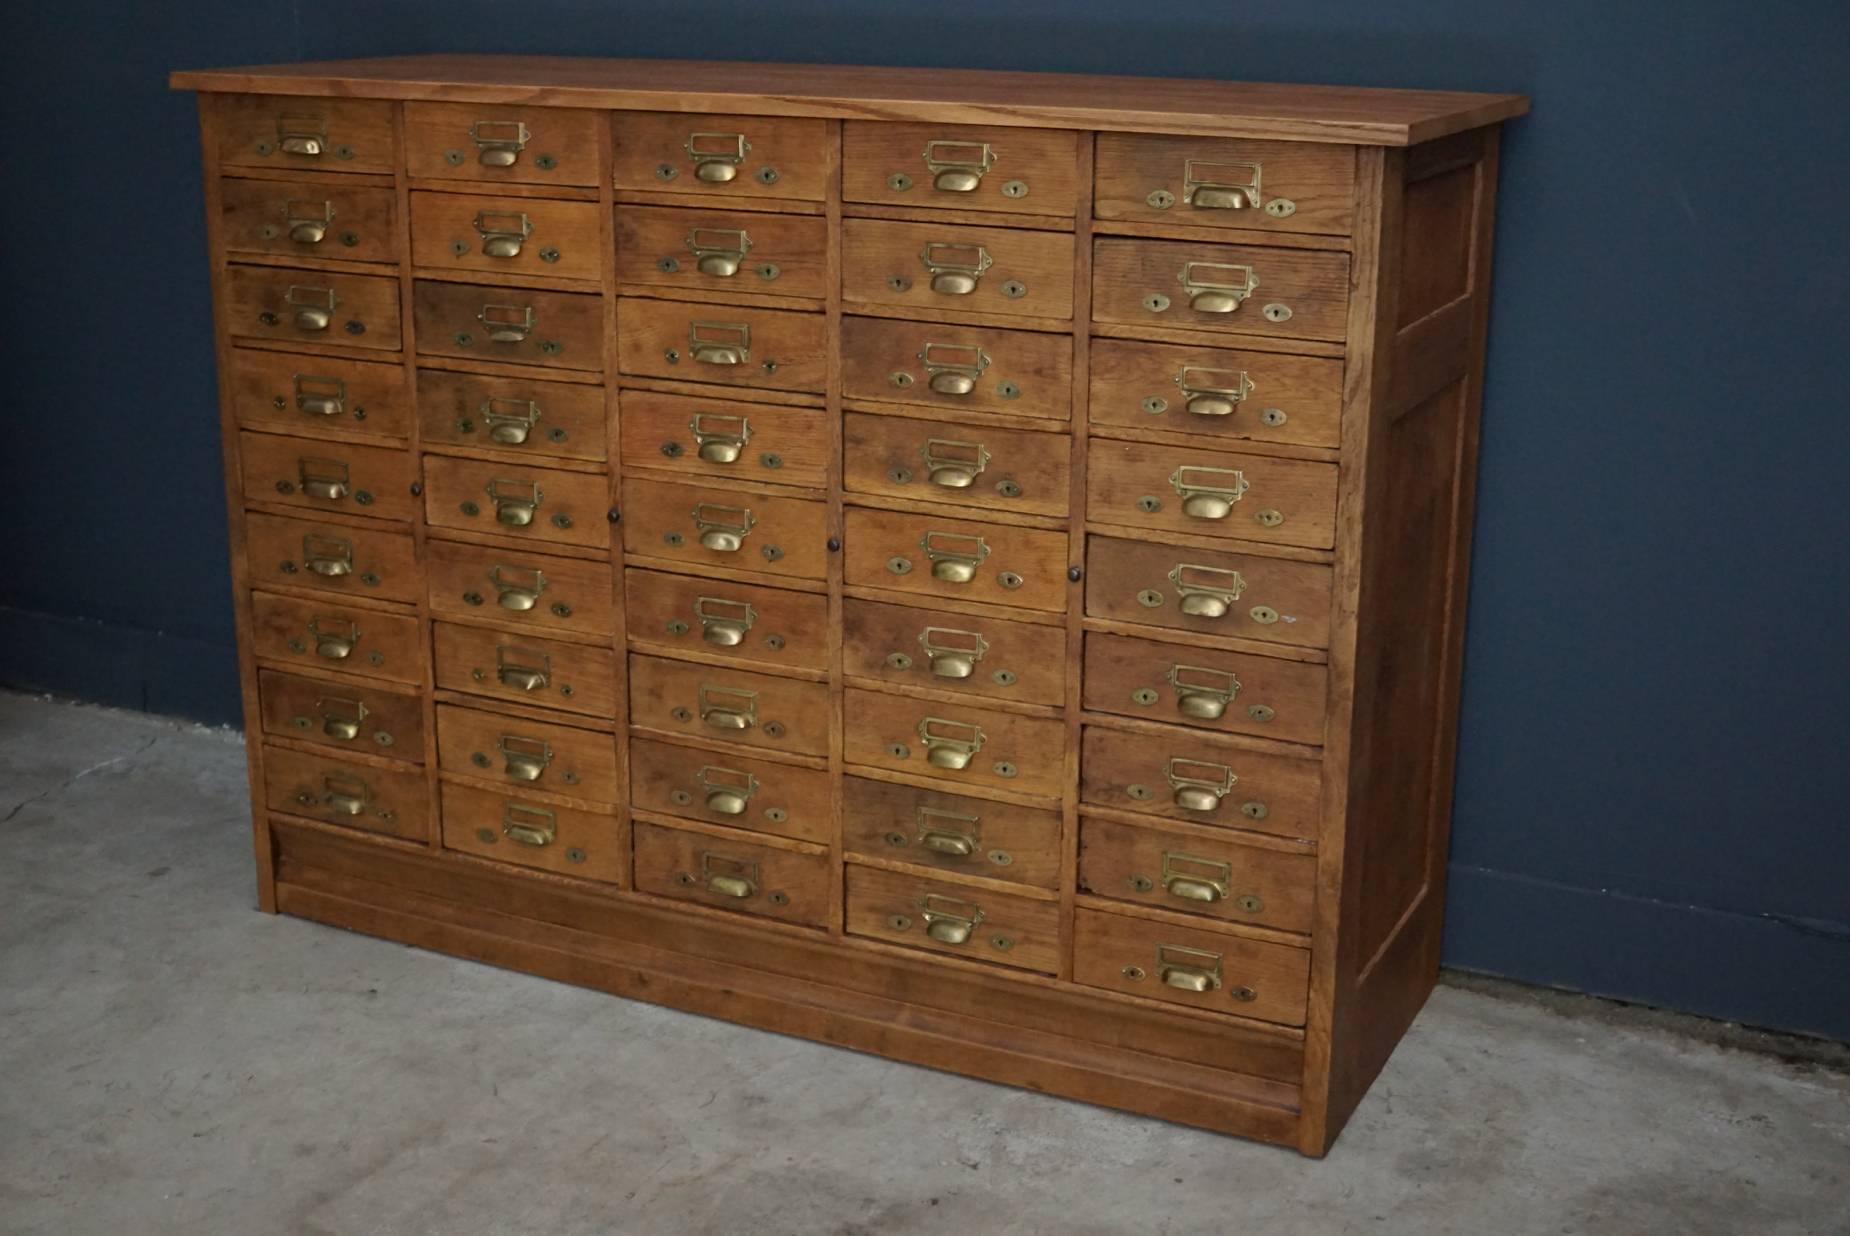 This oak apothecary cabinet was designed and made, circa 1900 in the Netherlands. It features 45 drawers with brass hardware and remains in a very good vintage restored condition.